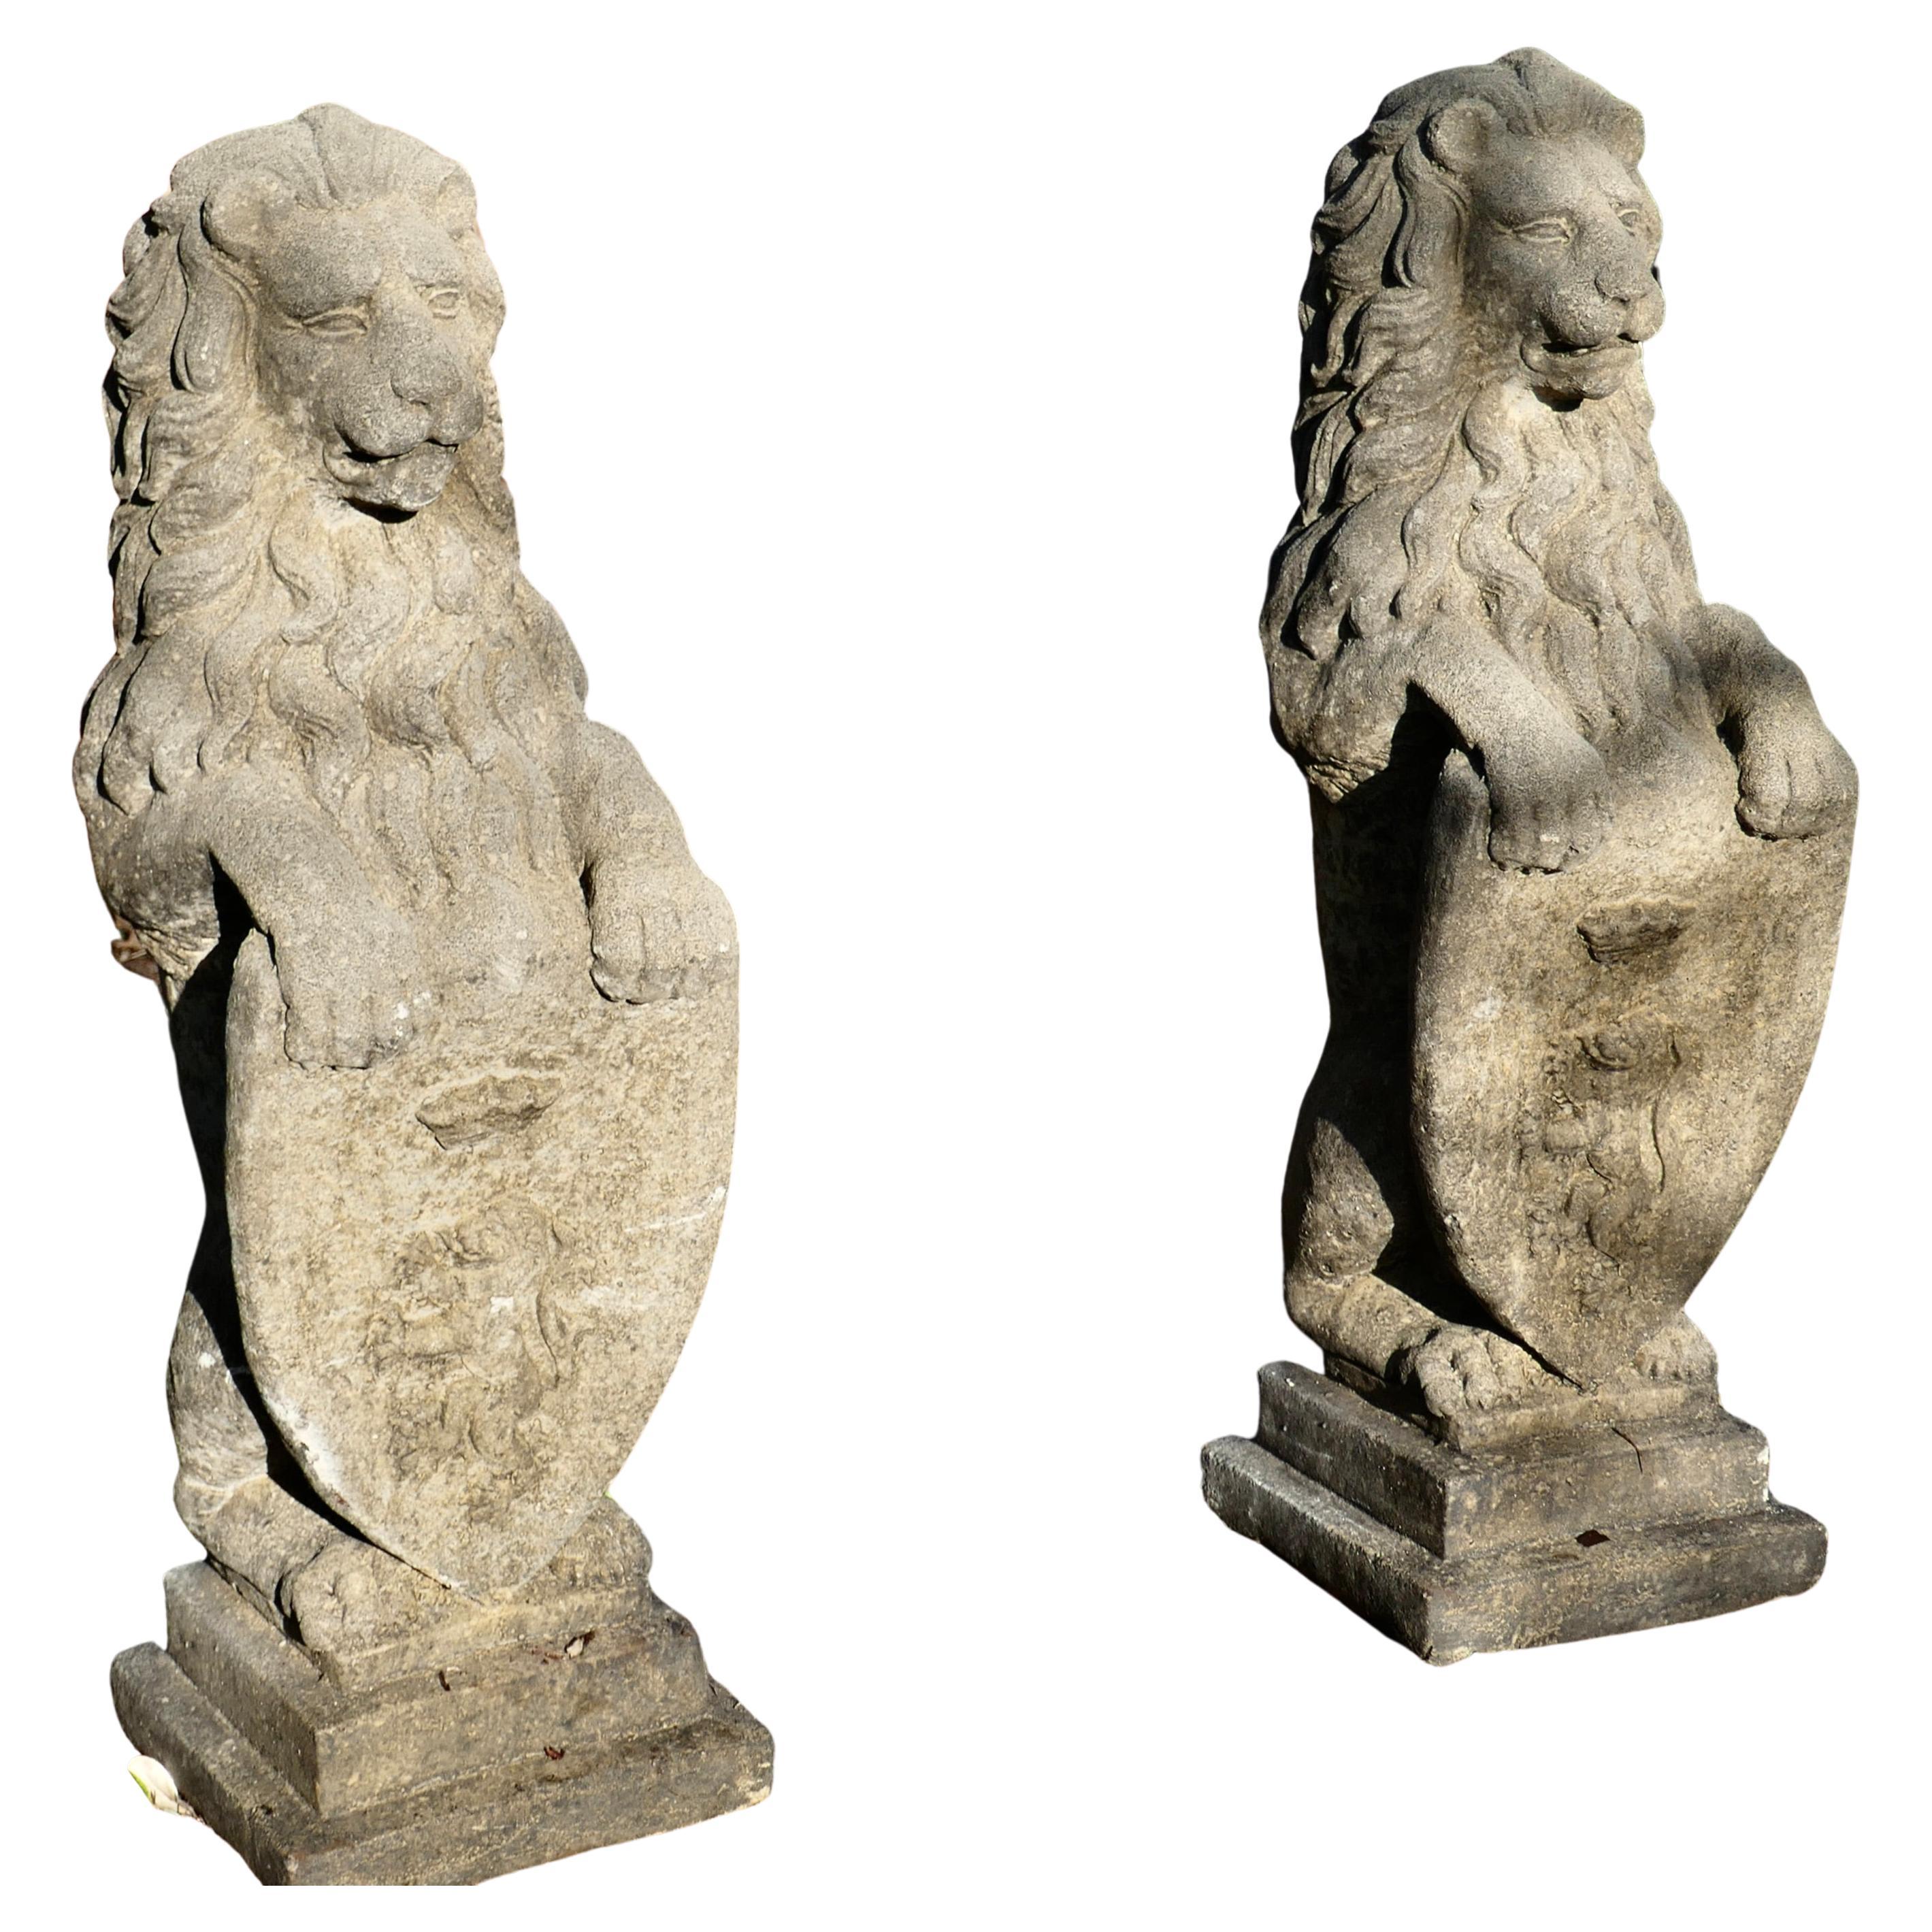 Pair of Large Sculptures of English Stone Heraldic Lions